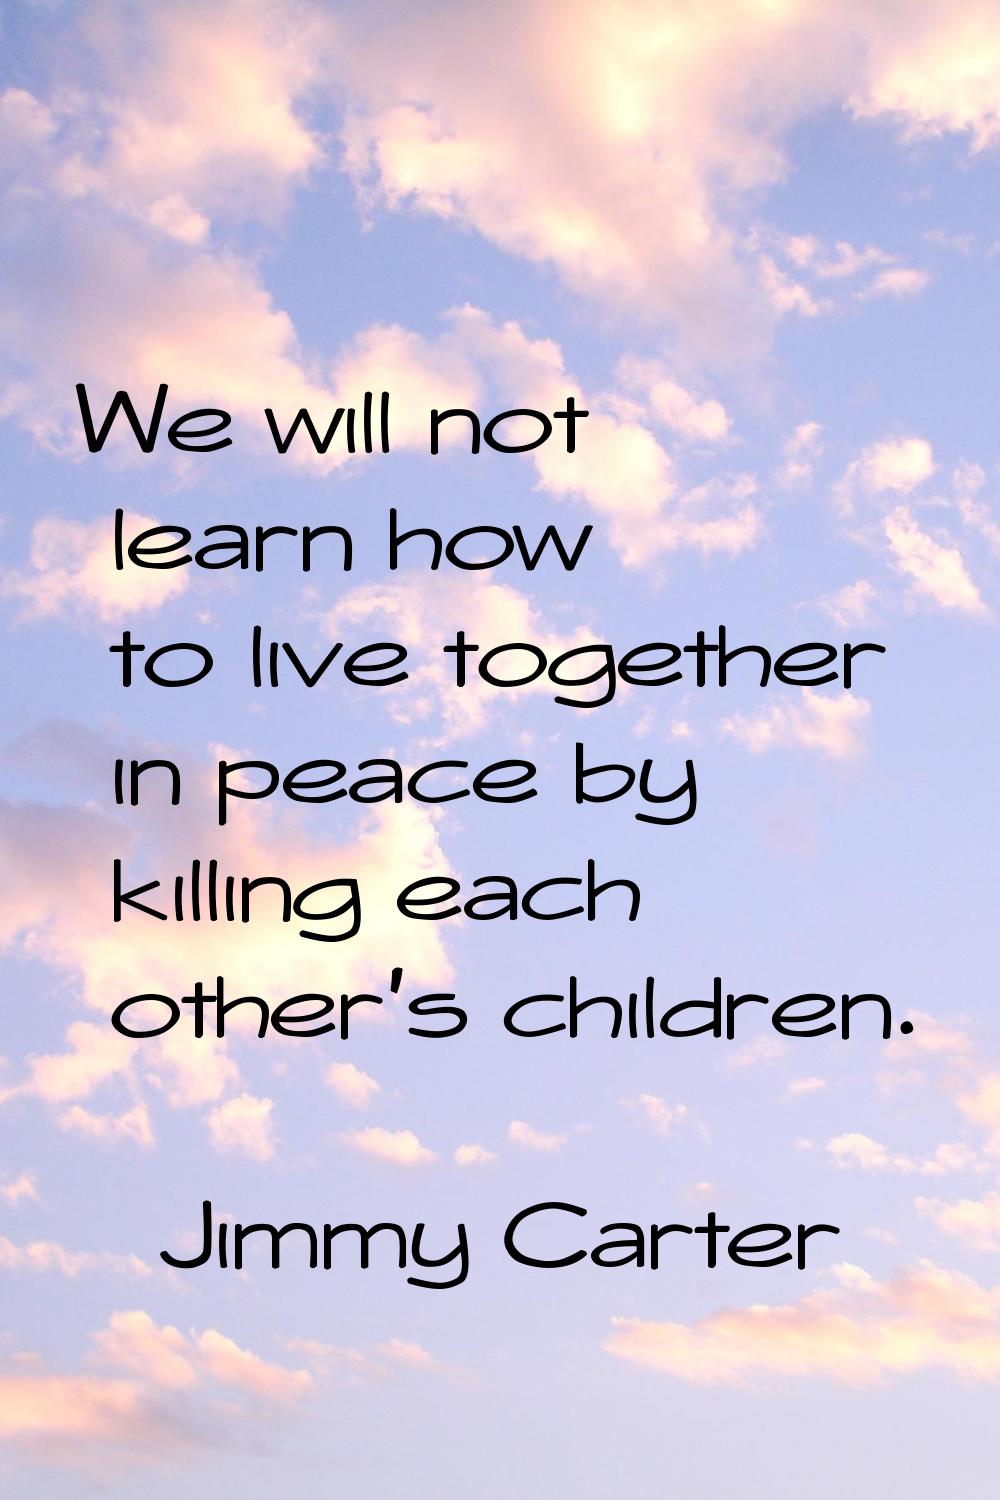 We will not learn how to live together in peace by killing each other's children.